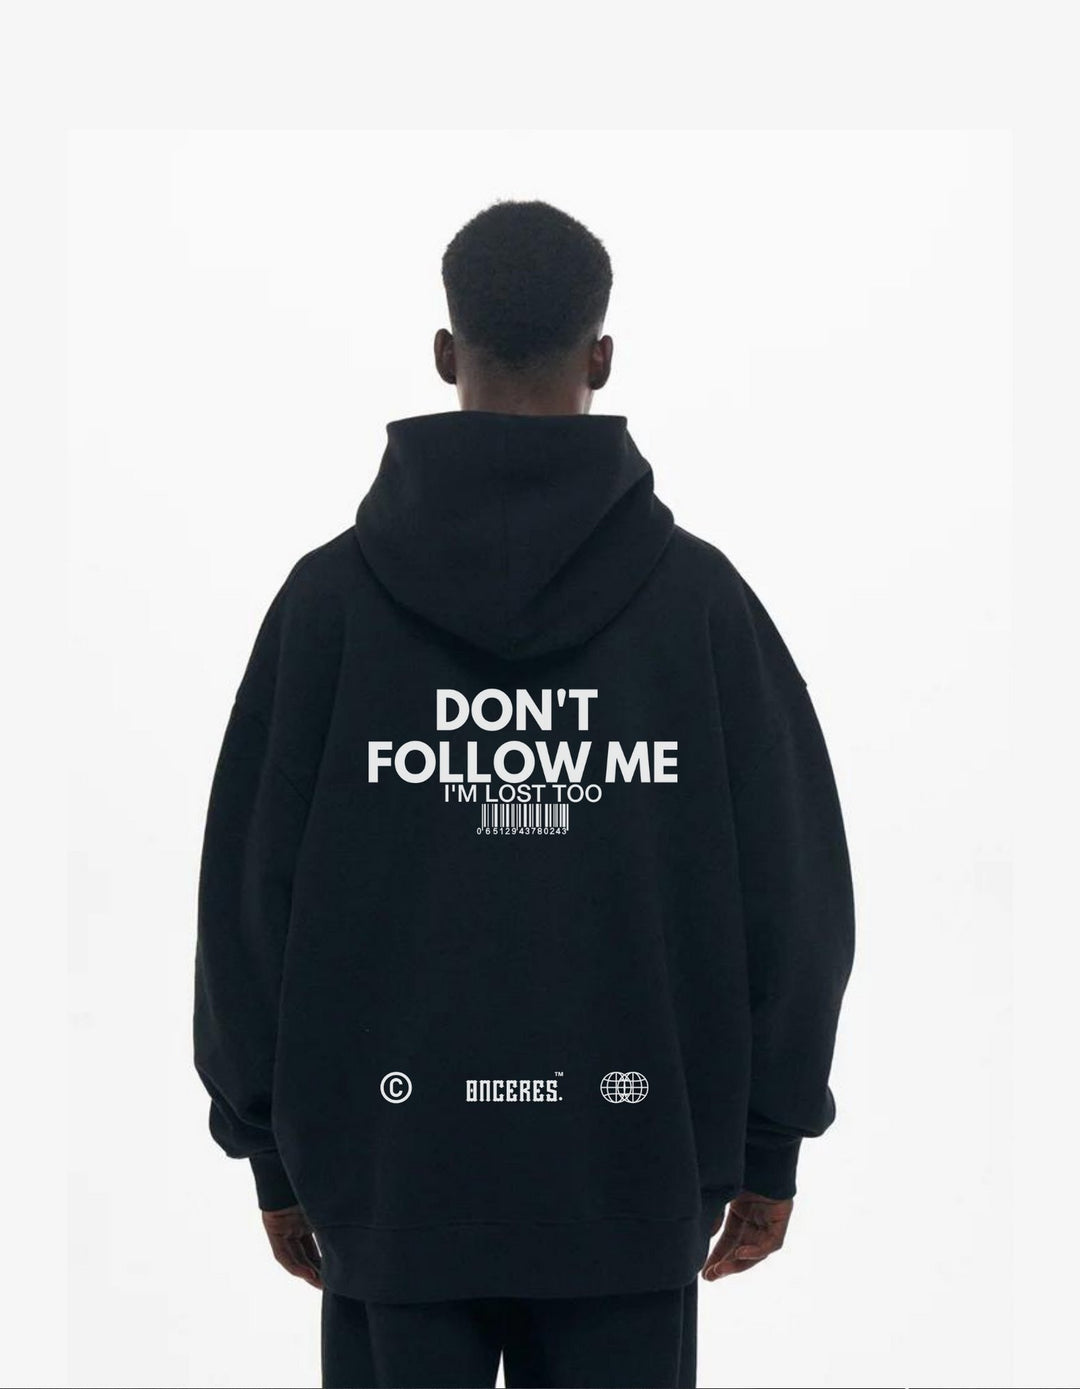 Don't follow me - Onceres™